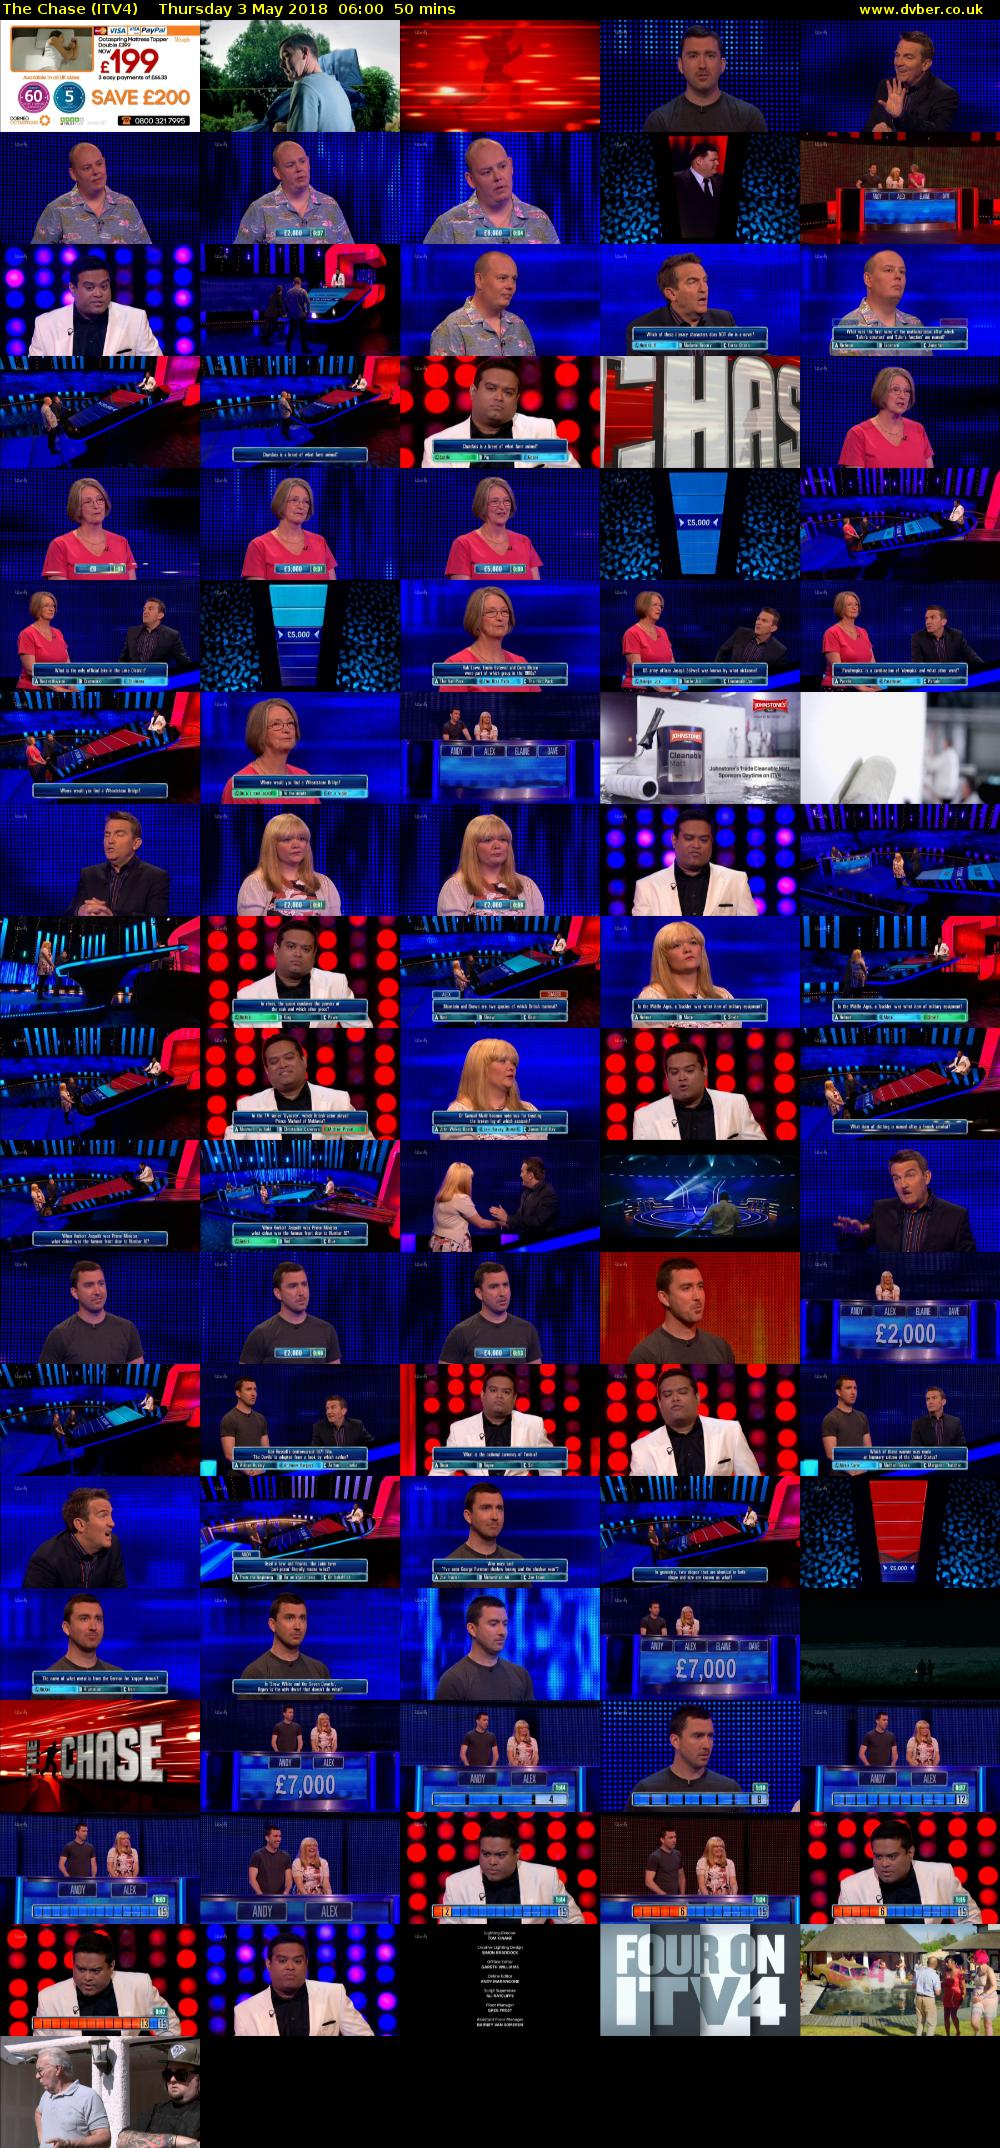 The Chase (ITV4) Thursday 3 May 2018 06:00 - 06:50